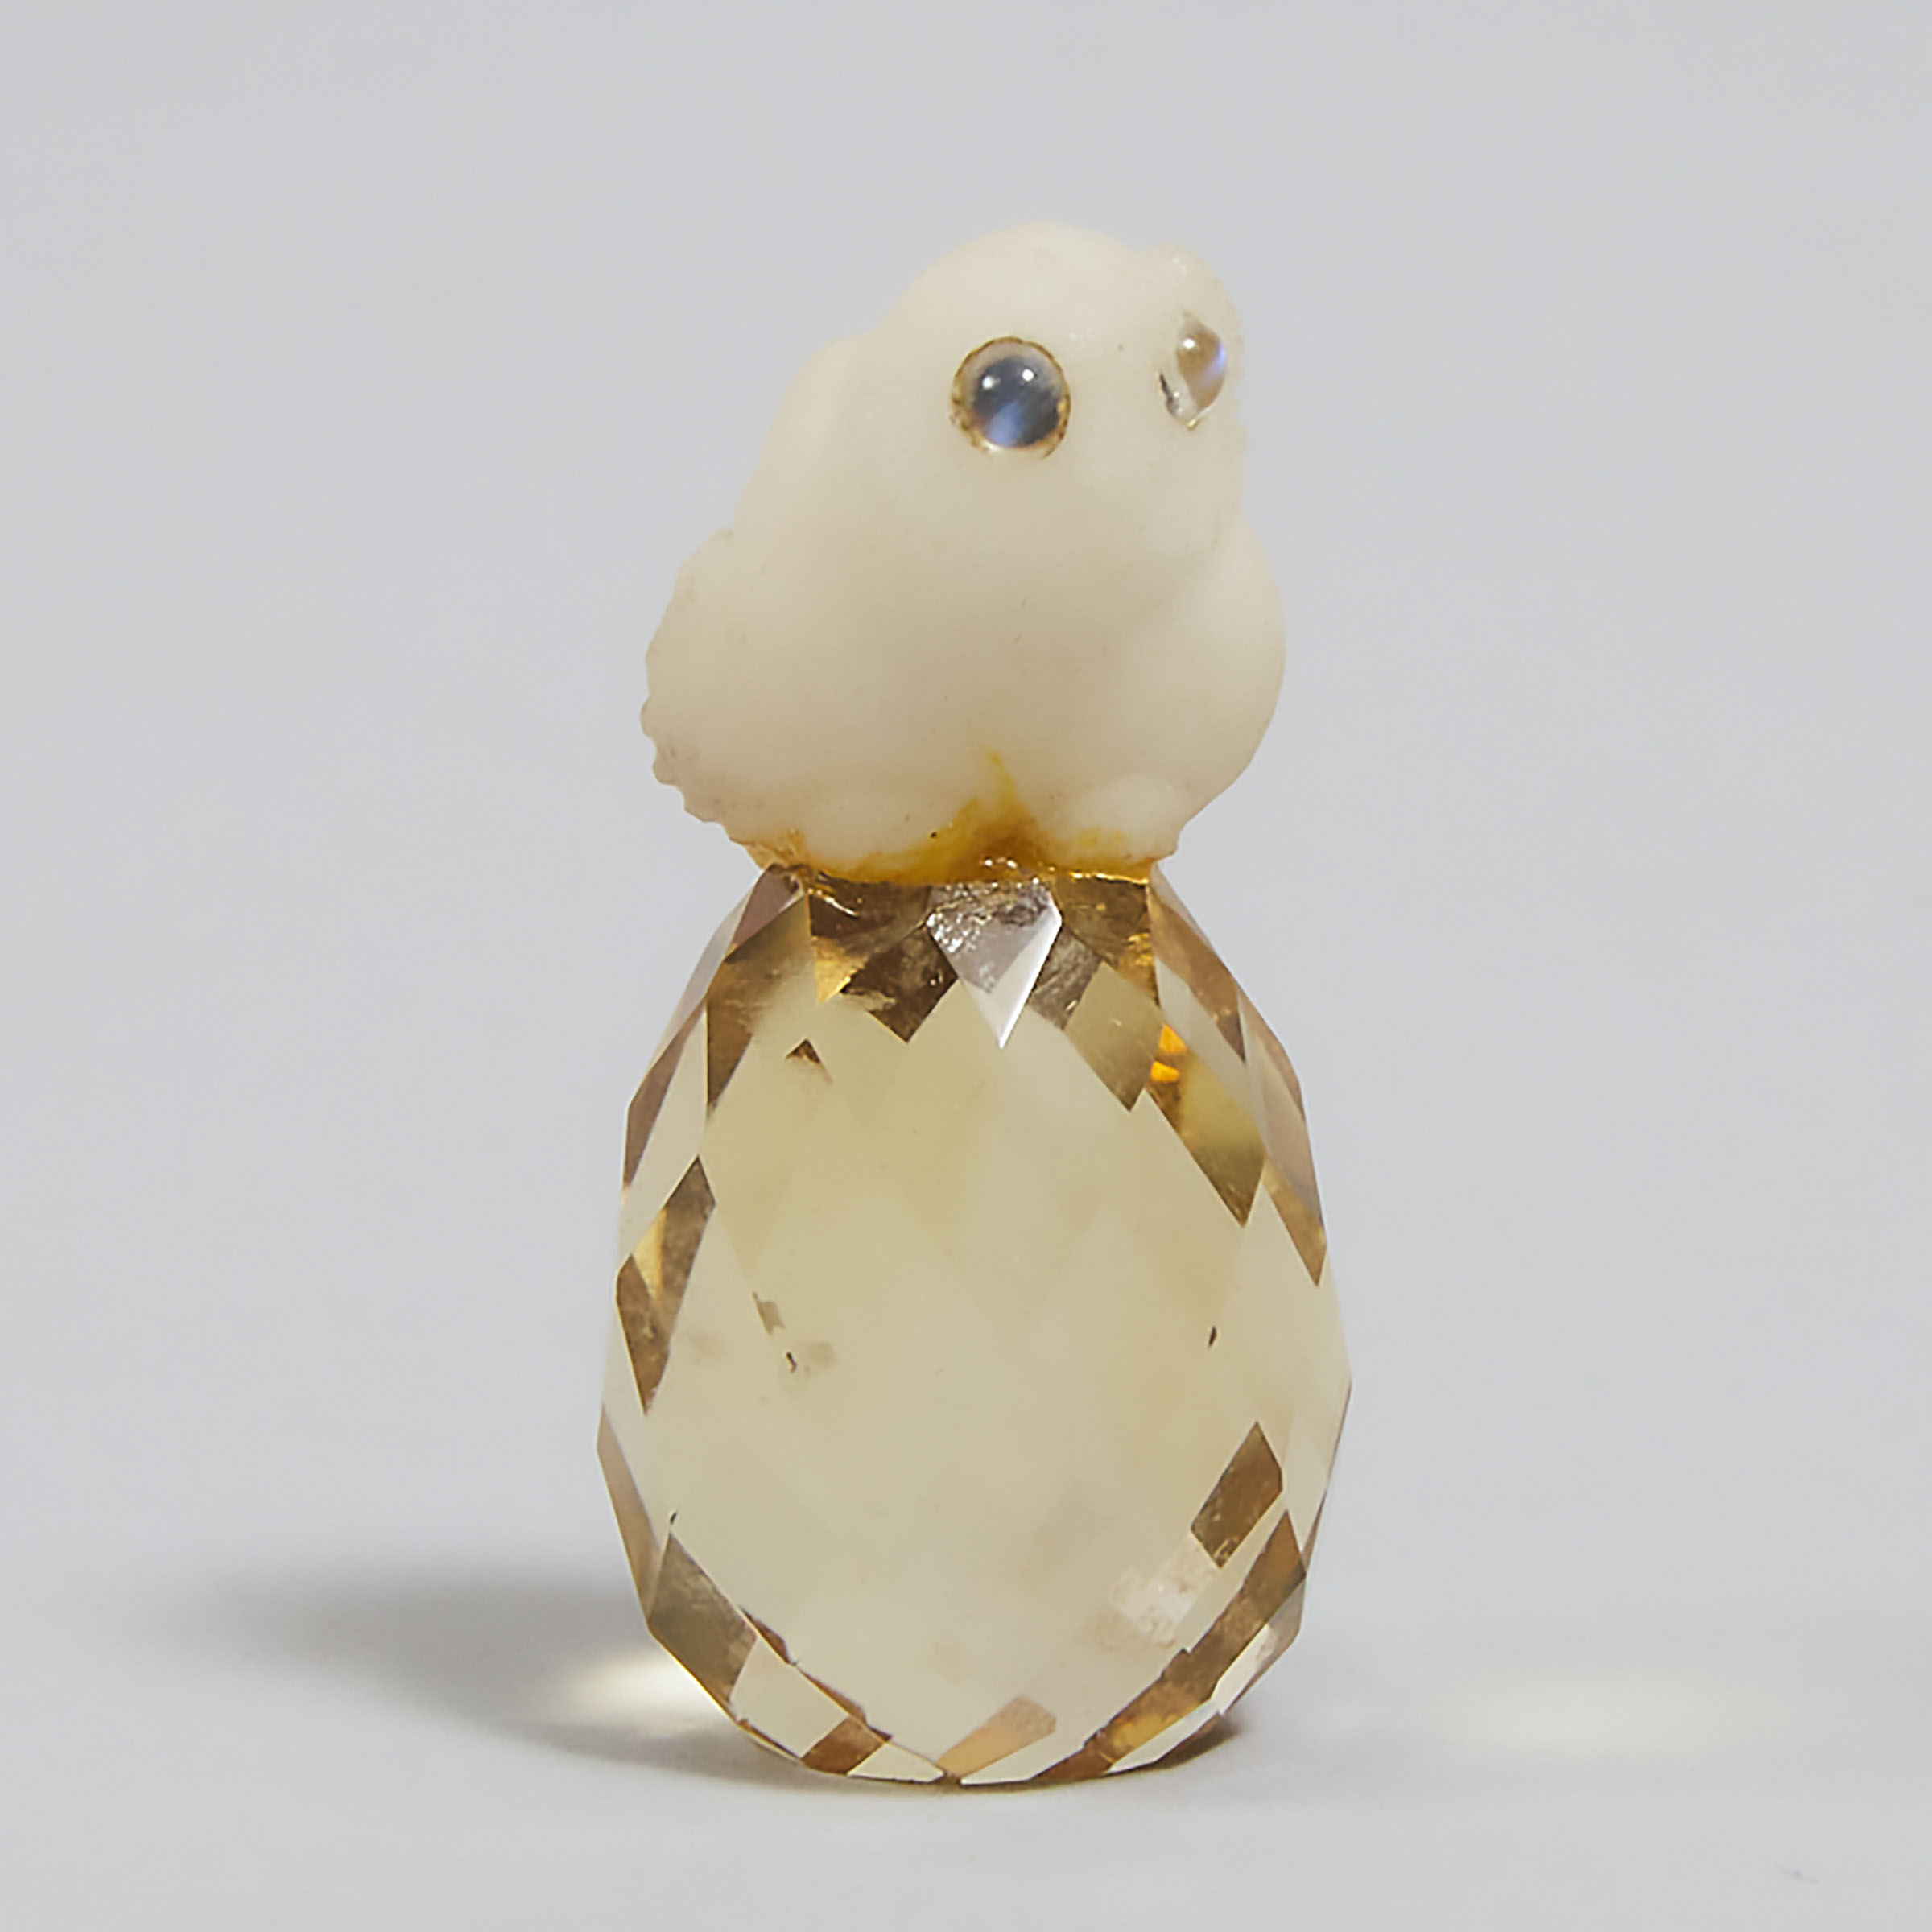 Russian Fabergé Style Carved Hardstone Owl, 20th century